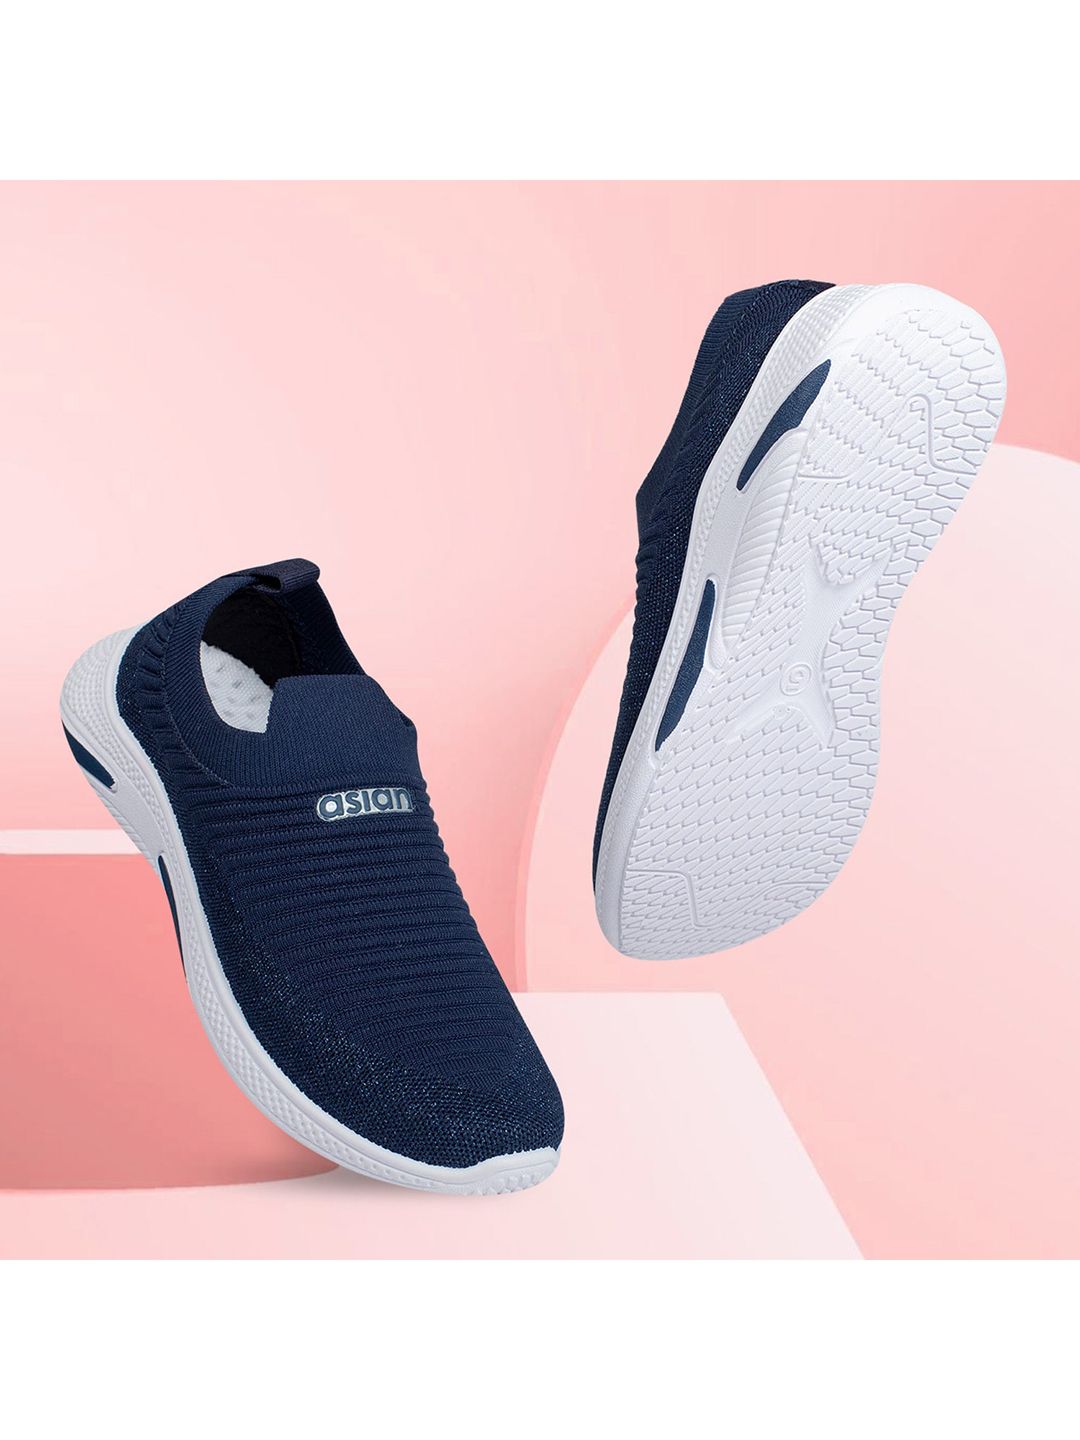 ASIAN Women Navy Blue Woven Design Slip-On Sneakers Price in India